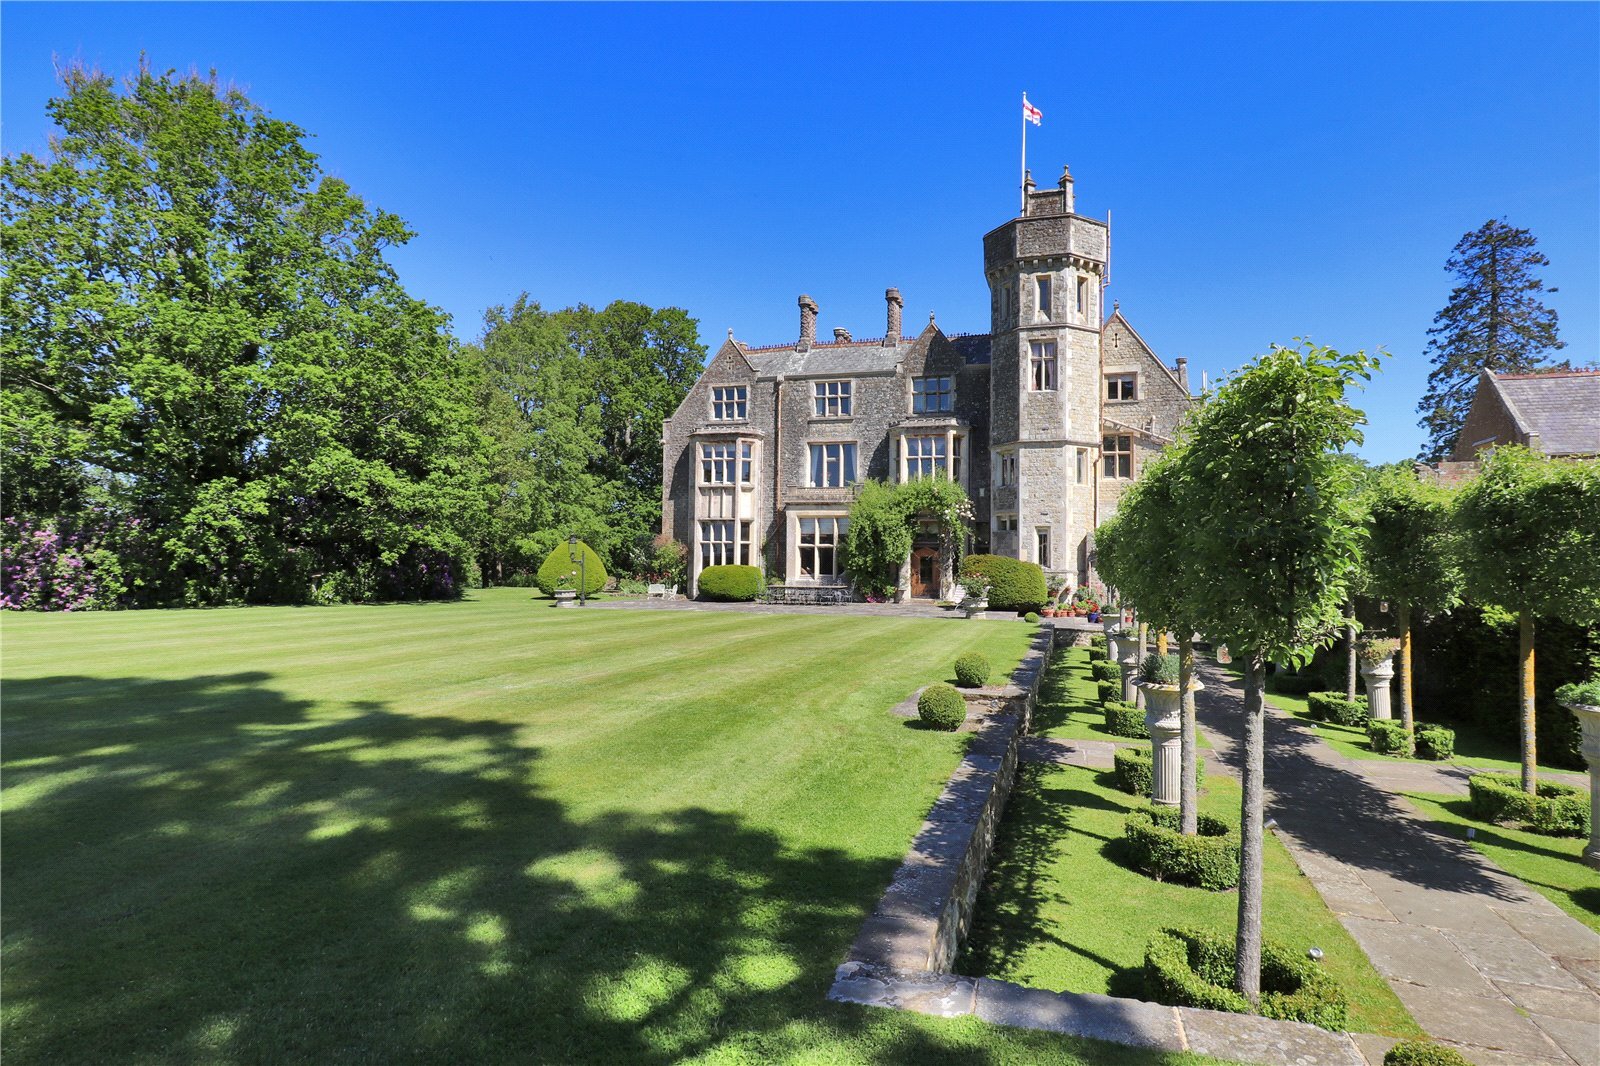 Francis York A Gothic-Style Mansion with Formal Gardens in Kent 24.jpg